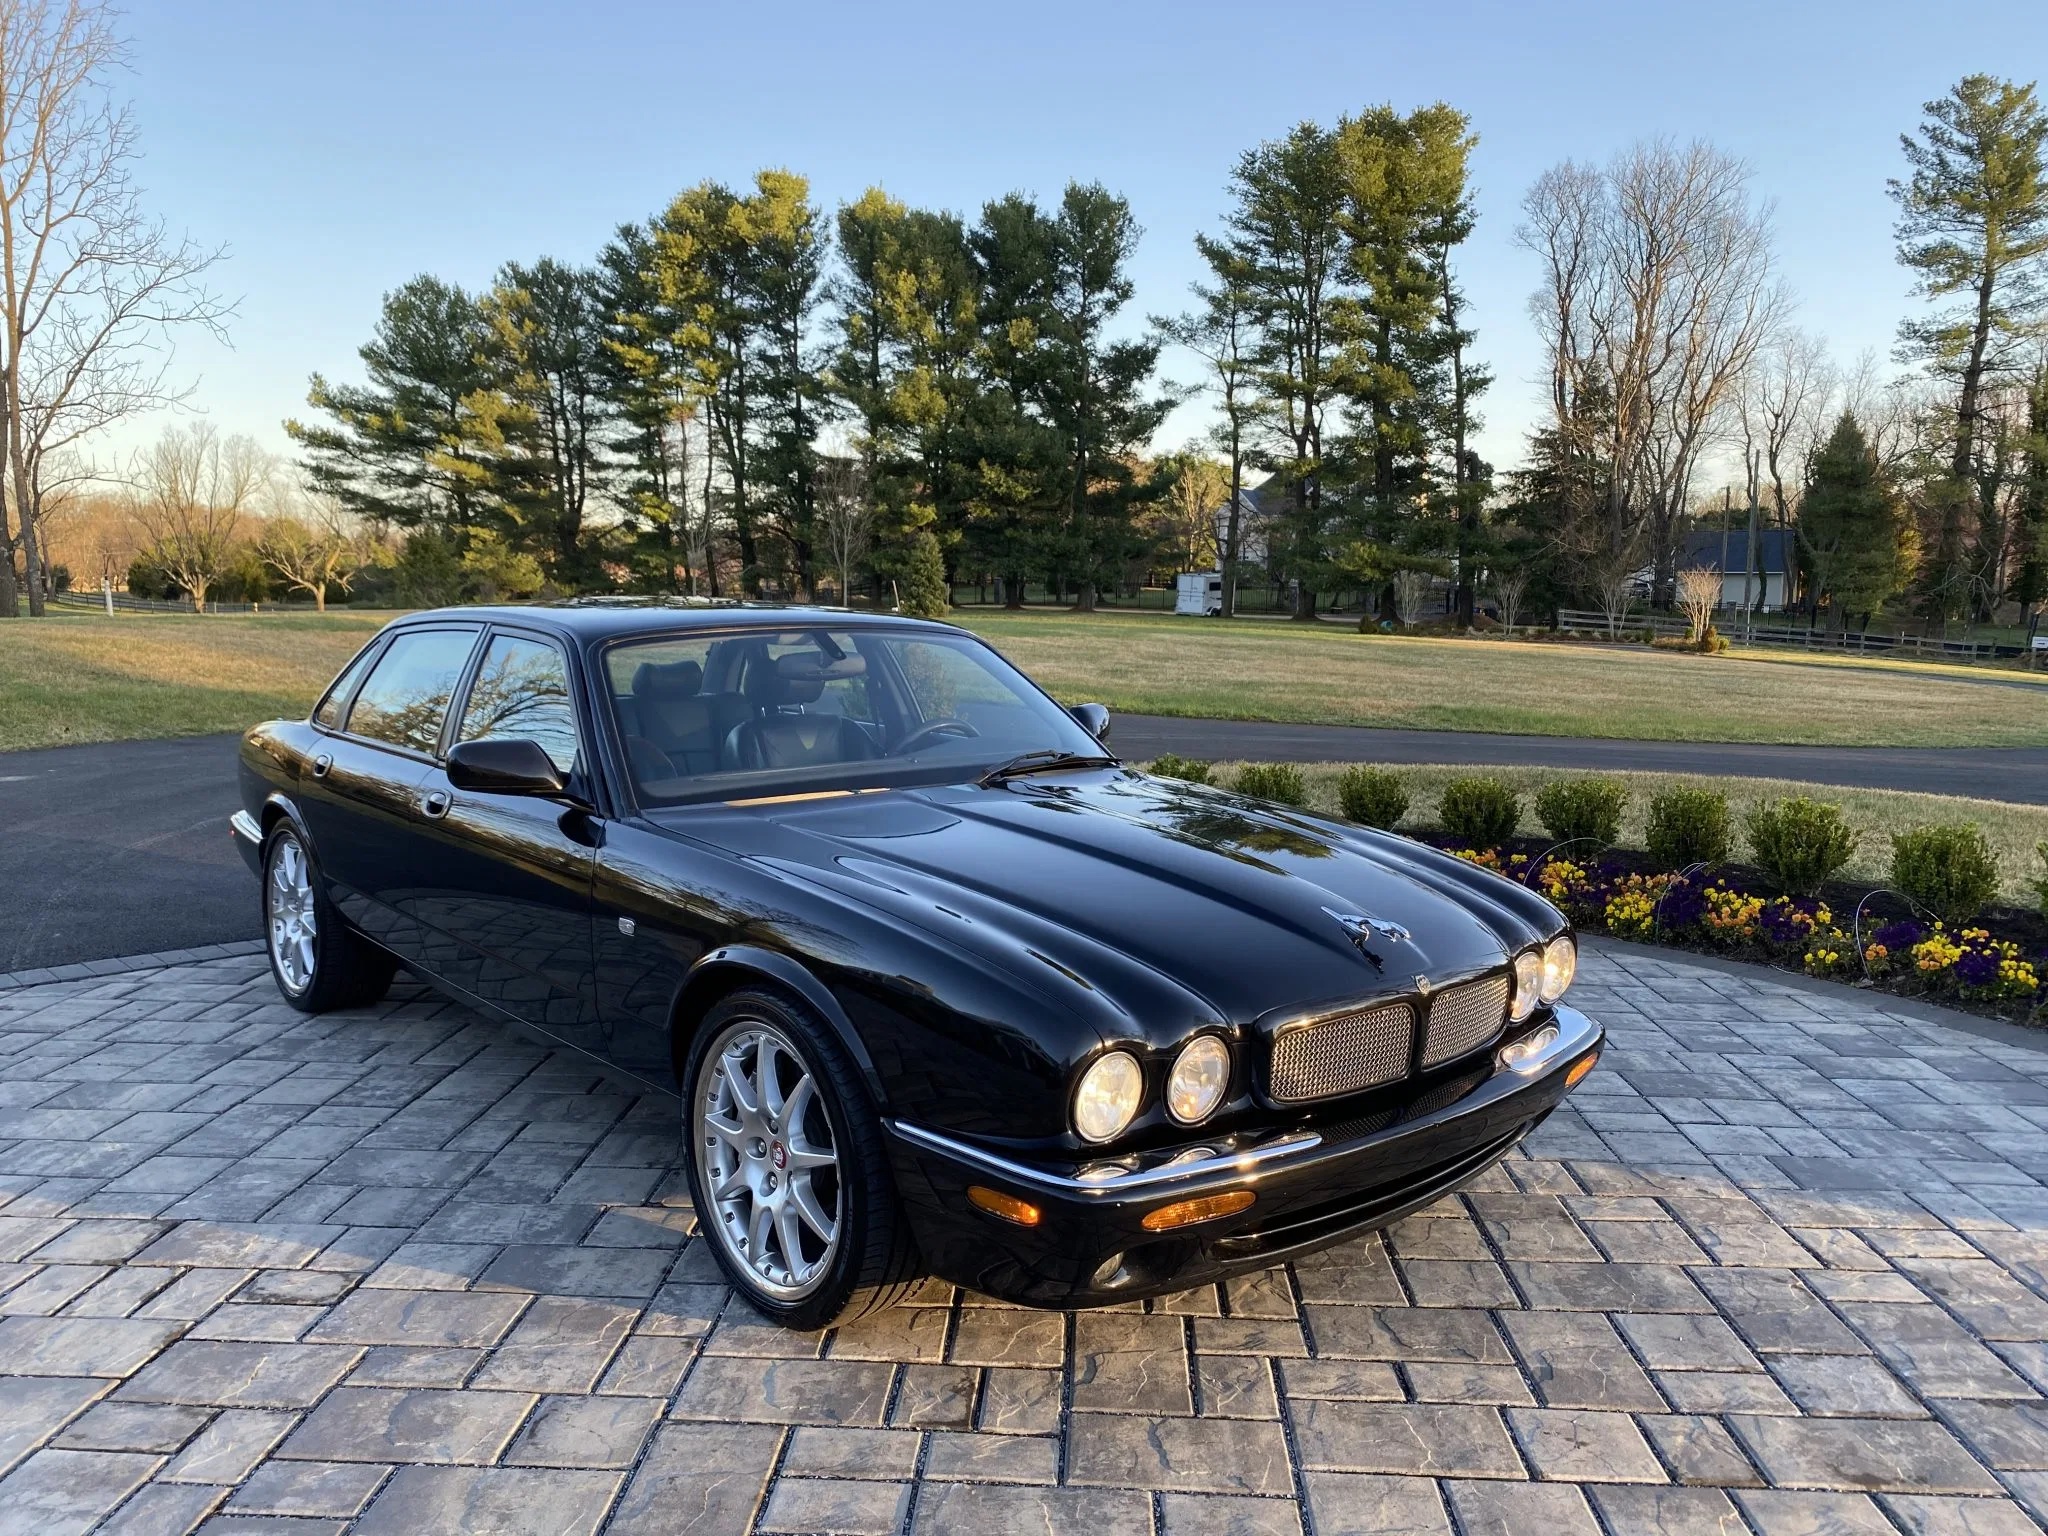 A black 2002 Jaguar XJR 100 on a stone driveway in front of a tree-lined lawn